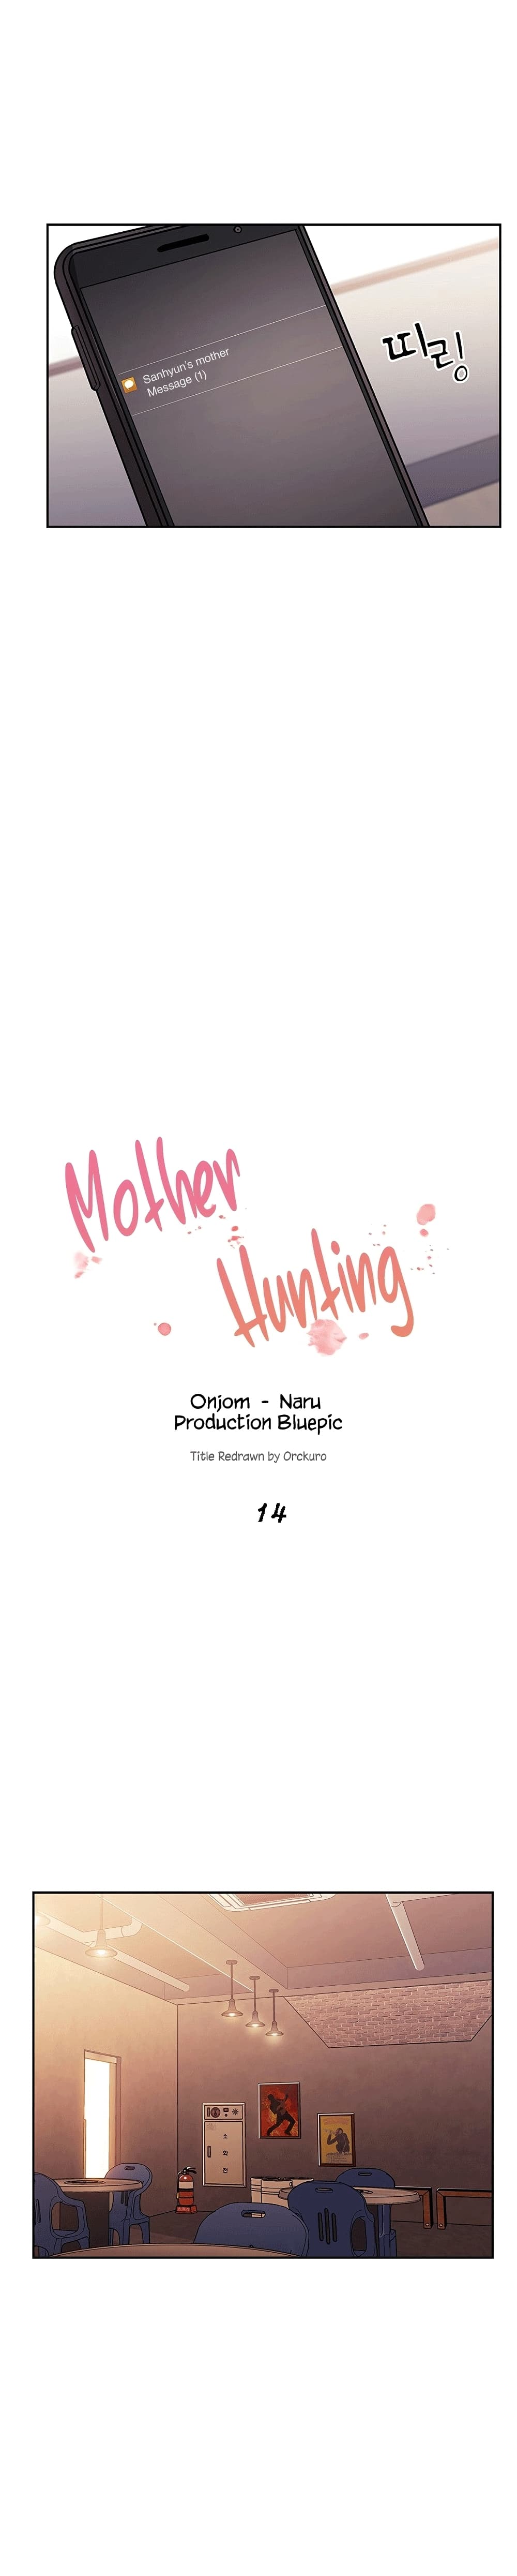 Mother Hunting 14 (1)